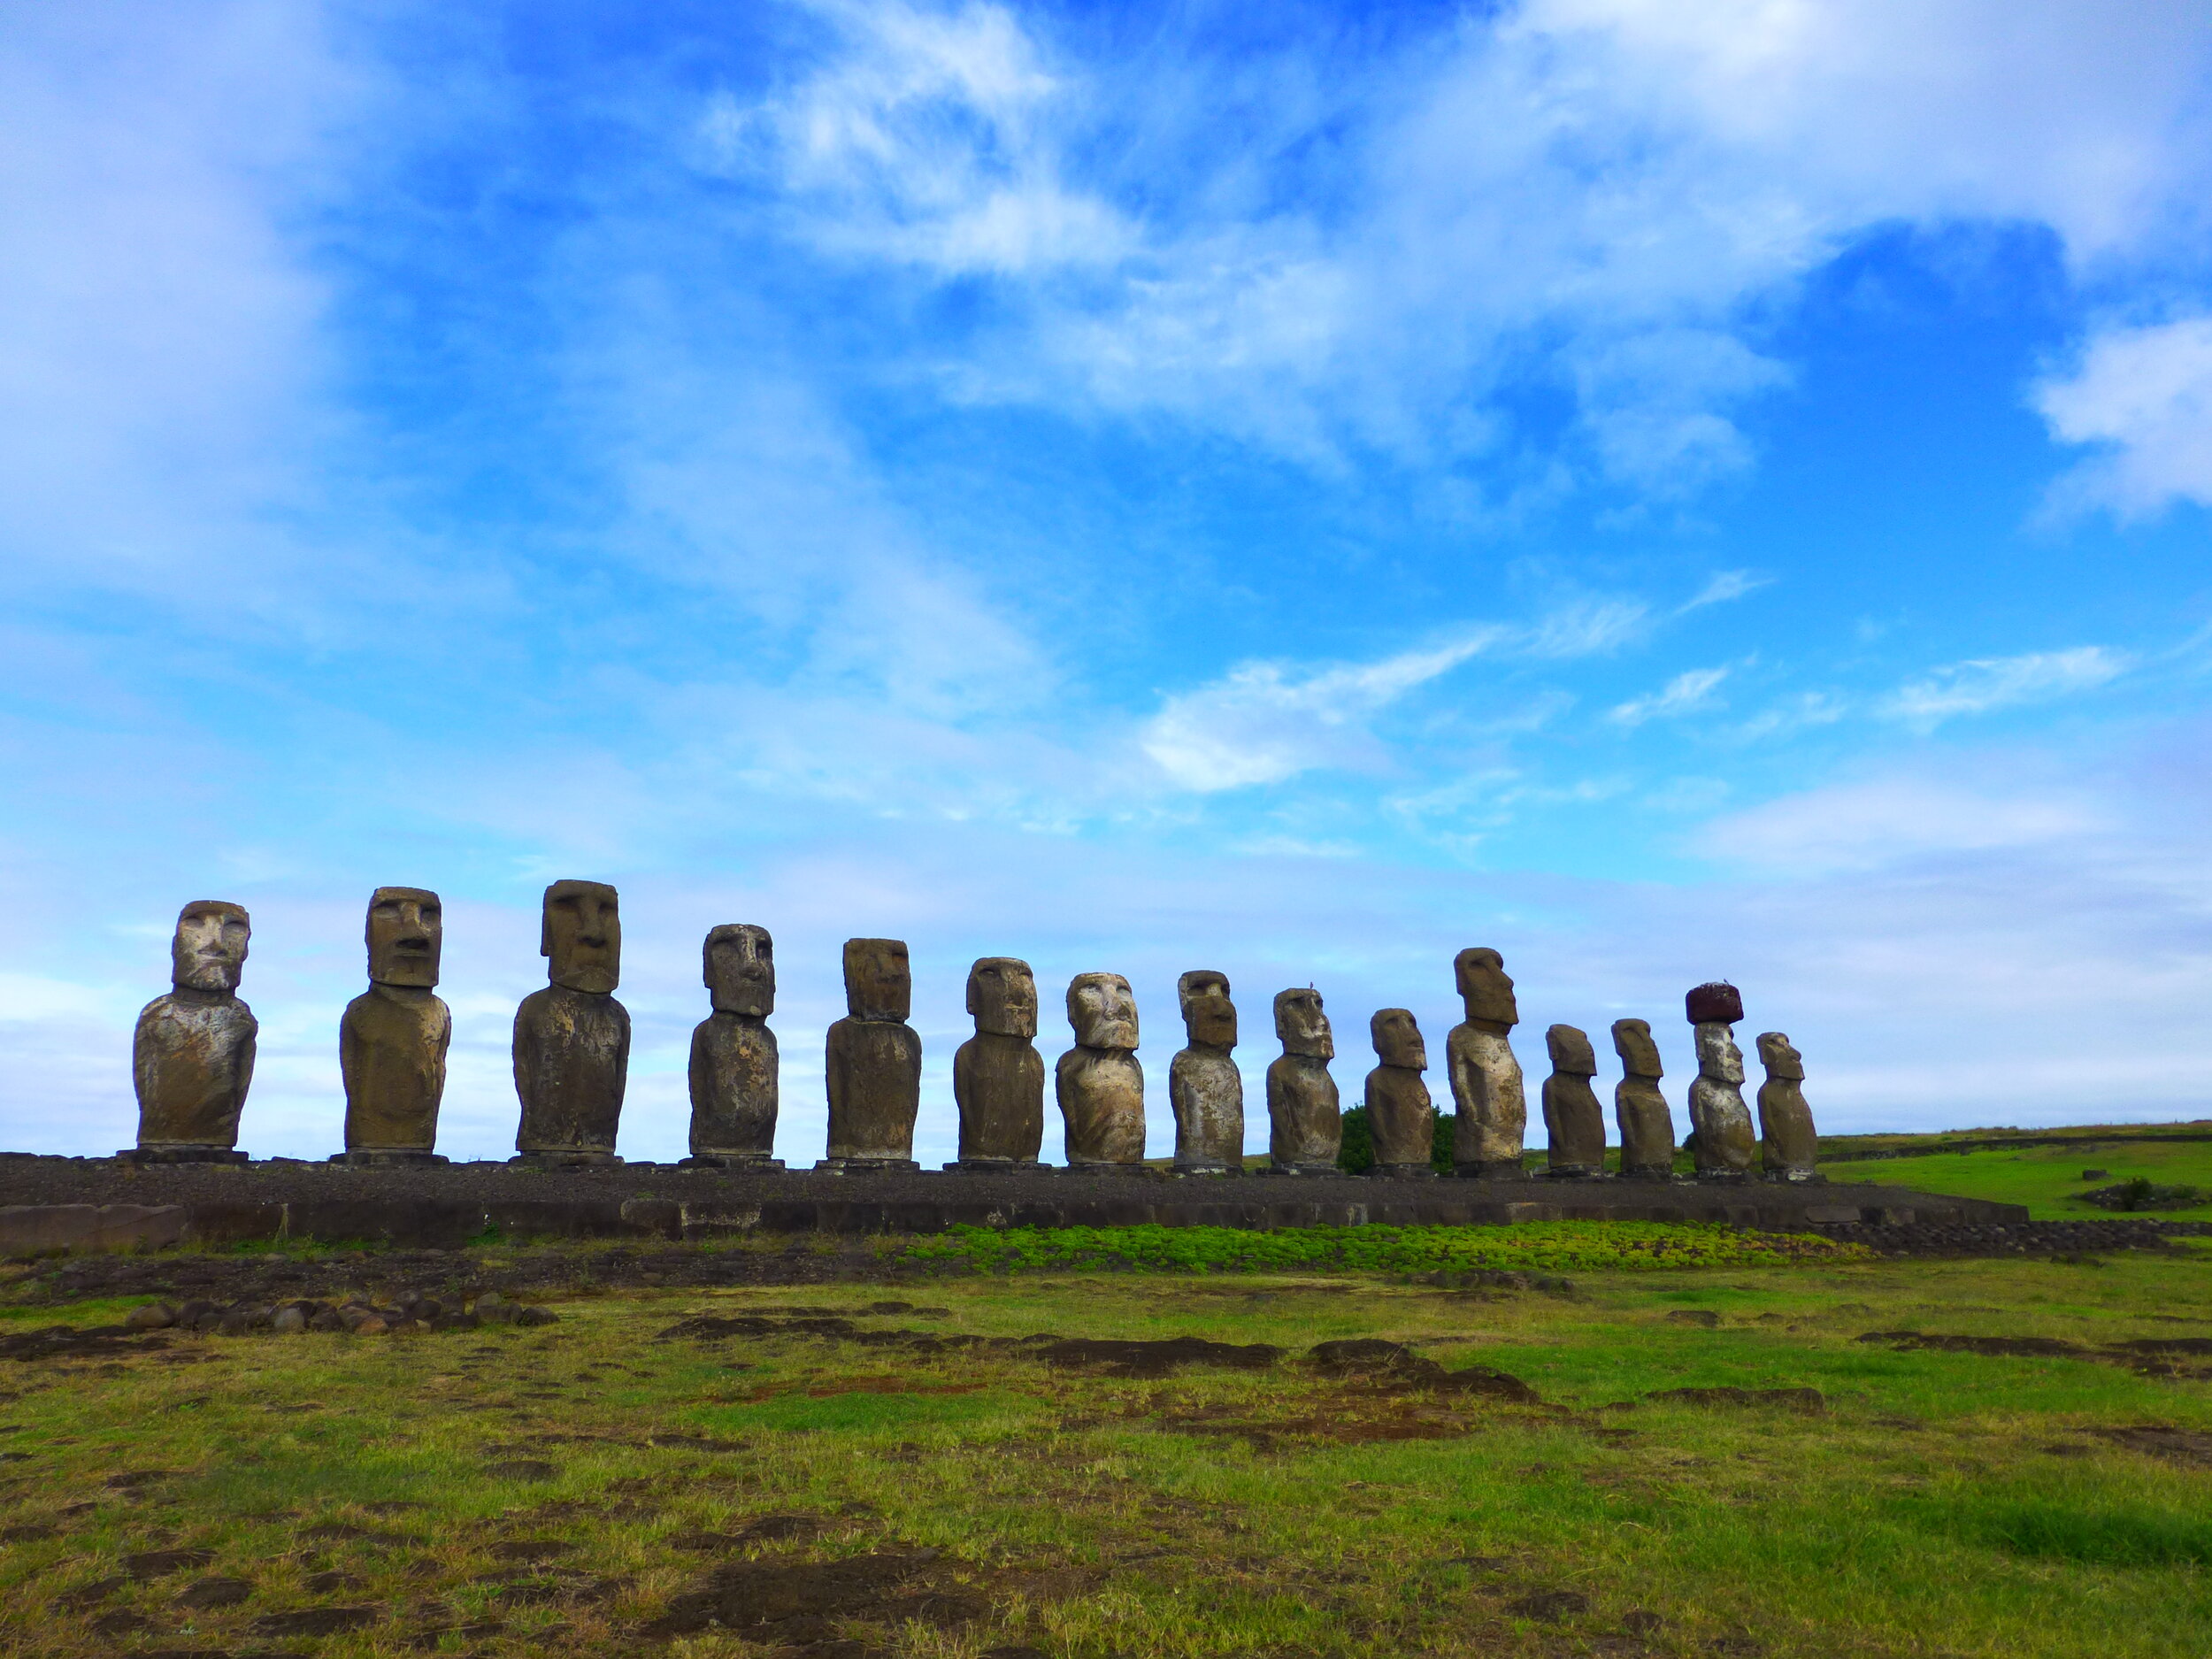  Take a trip to Easter Island and see the ancient stone statues  (moai)  created by the early Rapa Nui people - there are over 1,000 on the island  